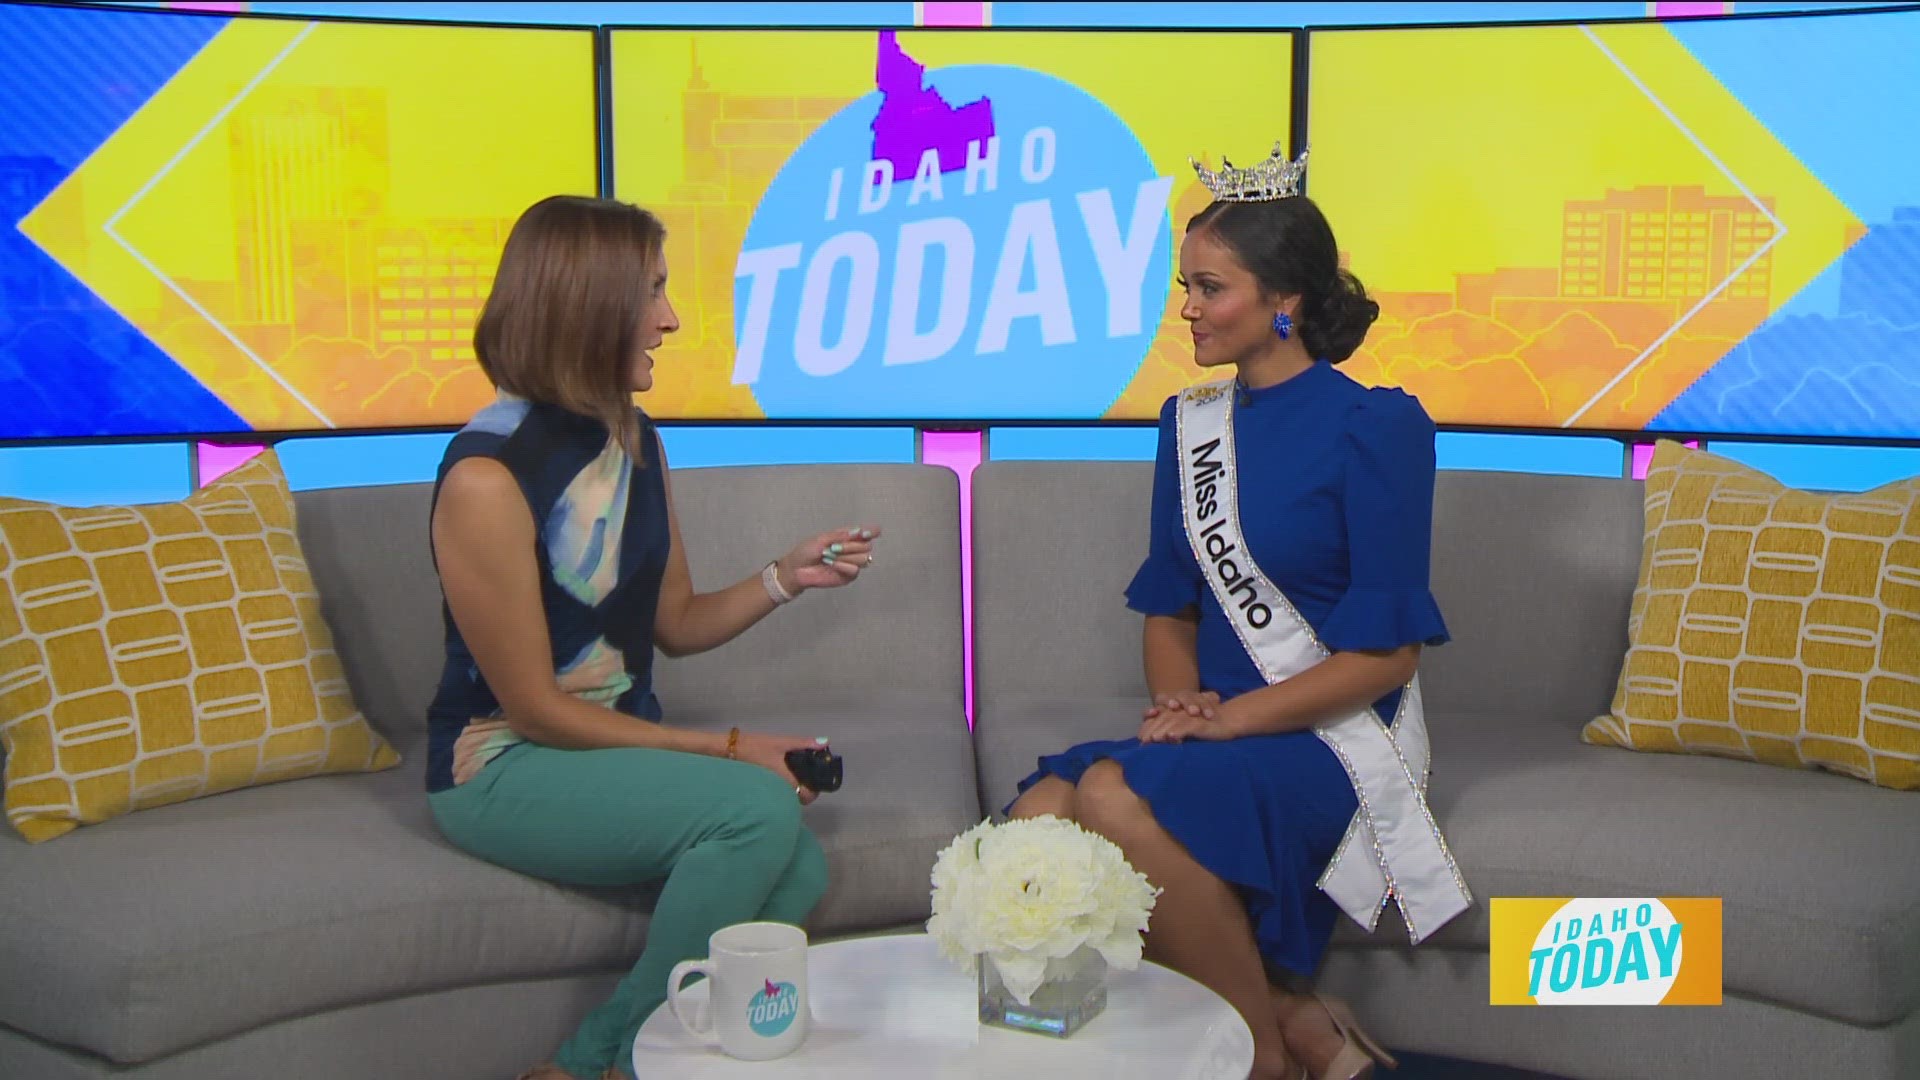 Miss Idaho stops by the Idaho Today studio to talk about the Miss America organization.